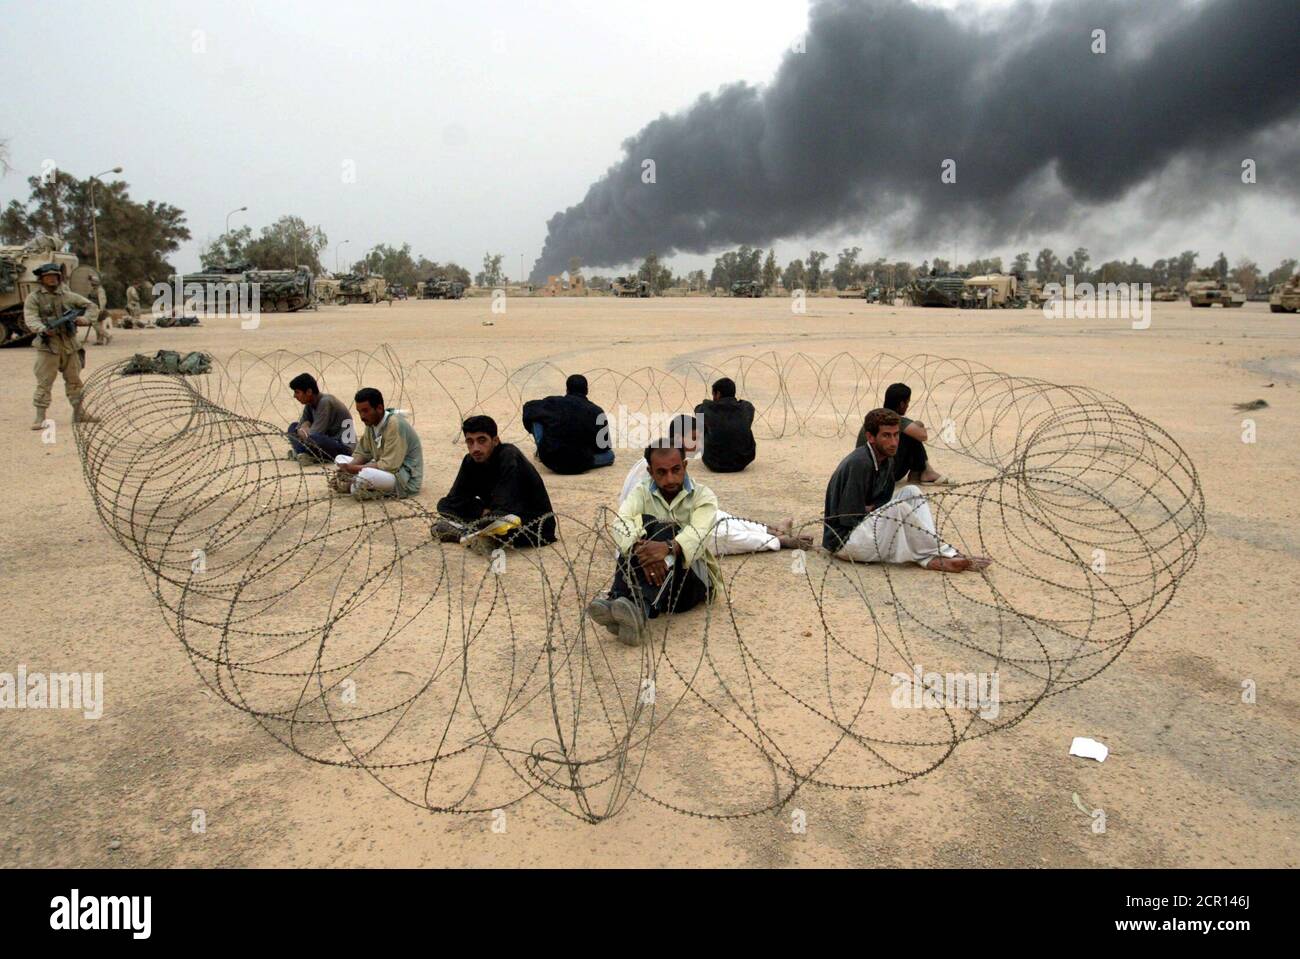 Members of the Iraqi Republican guard, dressed in civilian clothes, sit behind barbed wire at an abandoned Iraqi military base under the control of U.S. Marines in the suburbs of the Iraqi capital Baghdad on April 8, 2003. U.S. Marines attacked a military airfield on the southeastern outskirts of Baghdad on Tuesday, as U.S. forces tried to tighten their noose around the Iraqi capital, a Reuters correspondent said. Military sources said the Marines would gradually push forward towards the city centre. REUTERS/Oleg Popov  OP/ Stock Photo